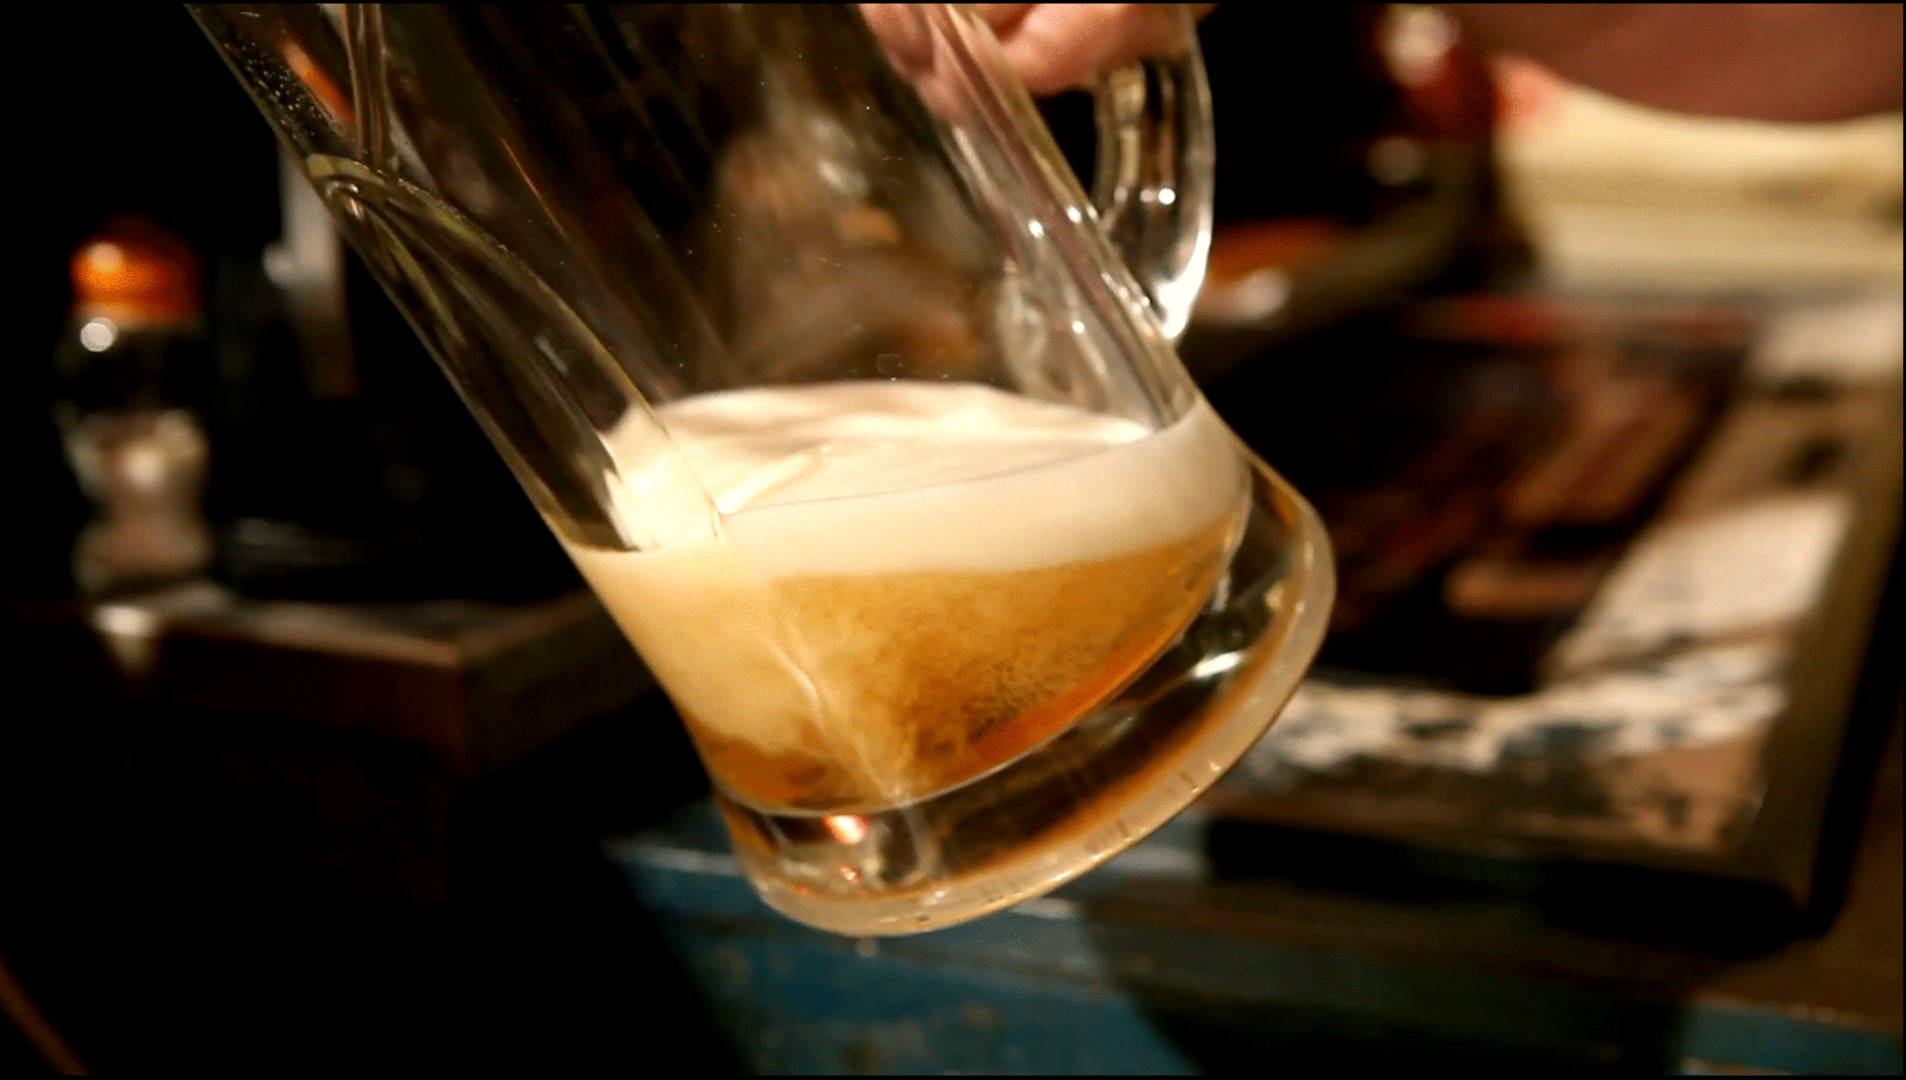 There are universities in America that offer courses on beer brewing.